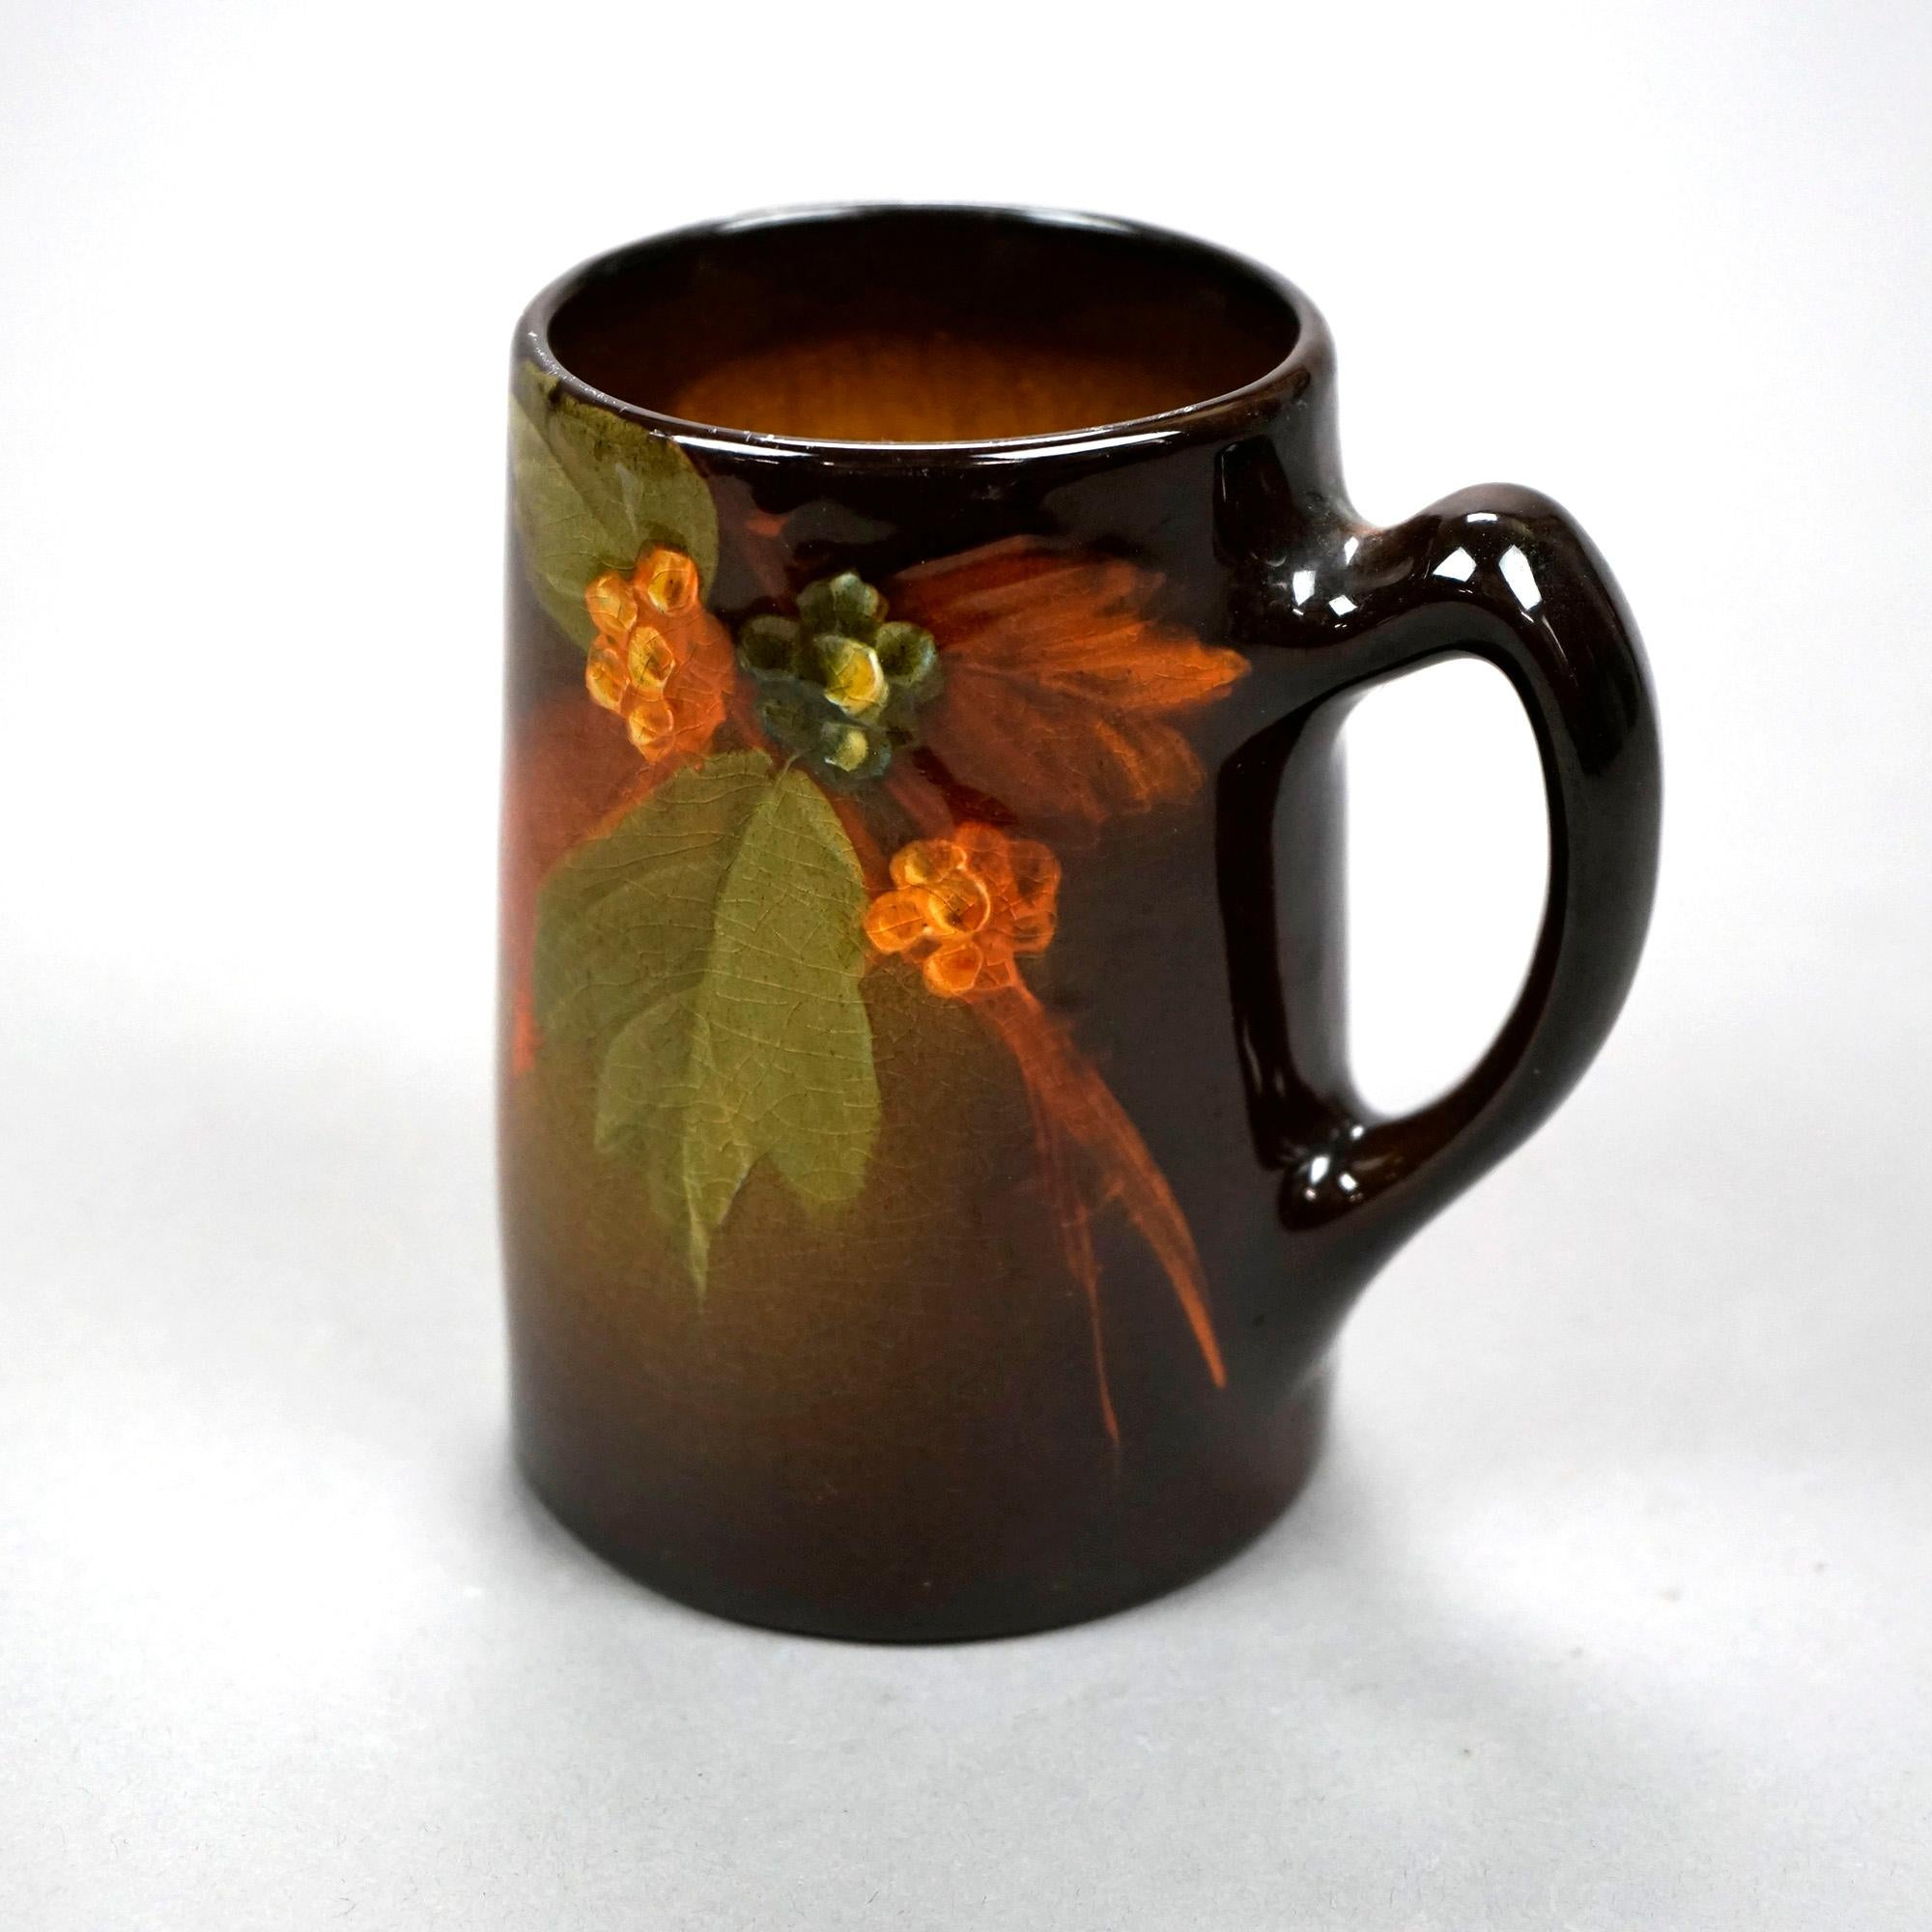 An antique mug by Owens offers art pottery construction with hand painted floral decoration and standard glaze, c1890

Measures- 5''H x 4.75''W x 3.5''D

Catalogue Note: Ask about DISCOUNTED DELIVERY RATES available to most regions within 1,500